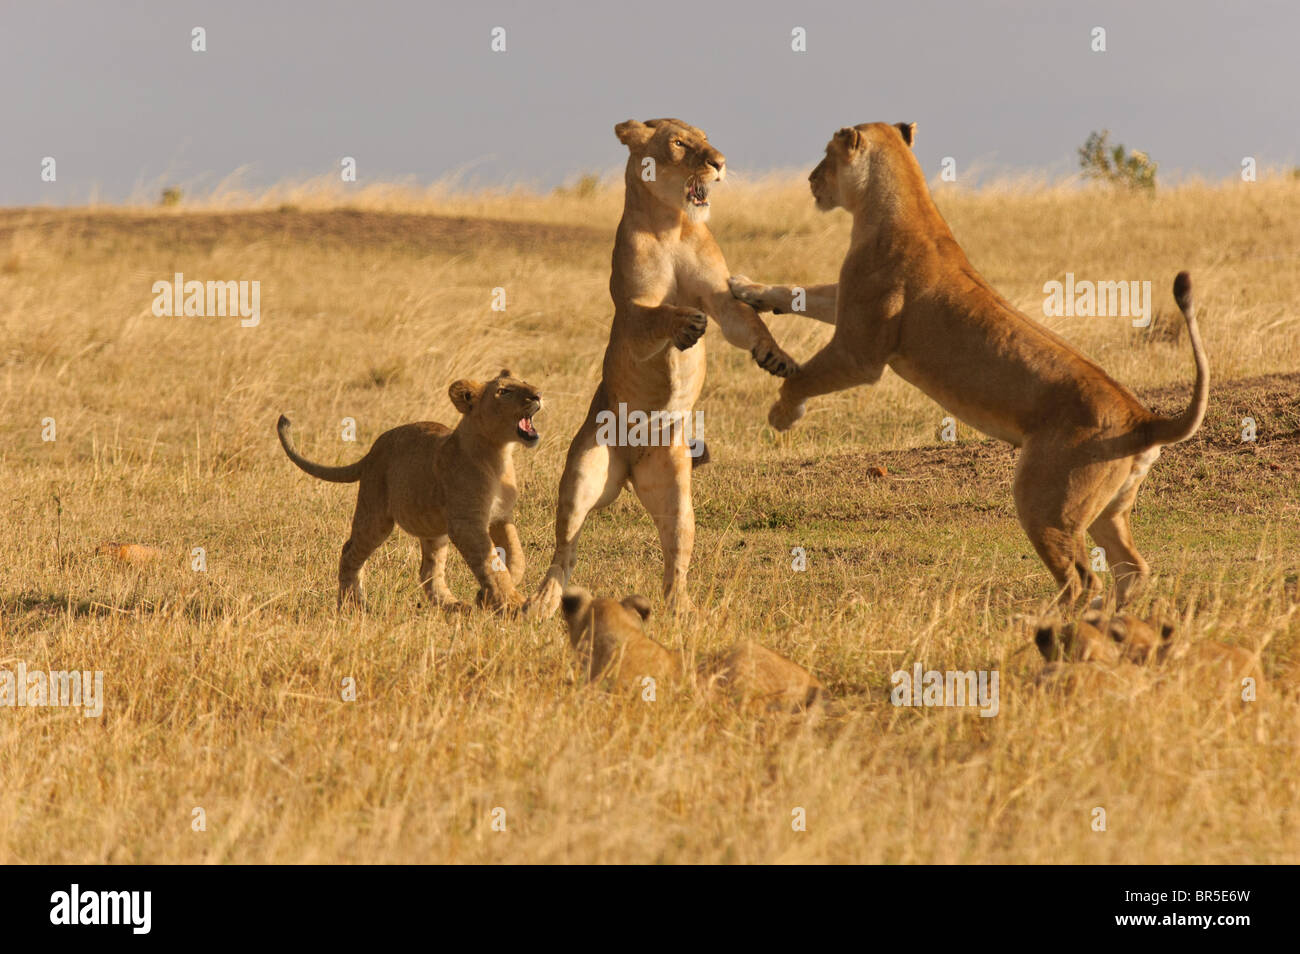 Two lions play fighting while cubs watch Stock Photo